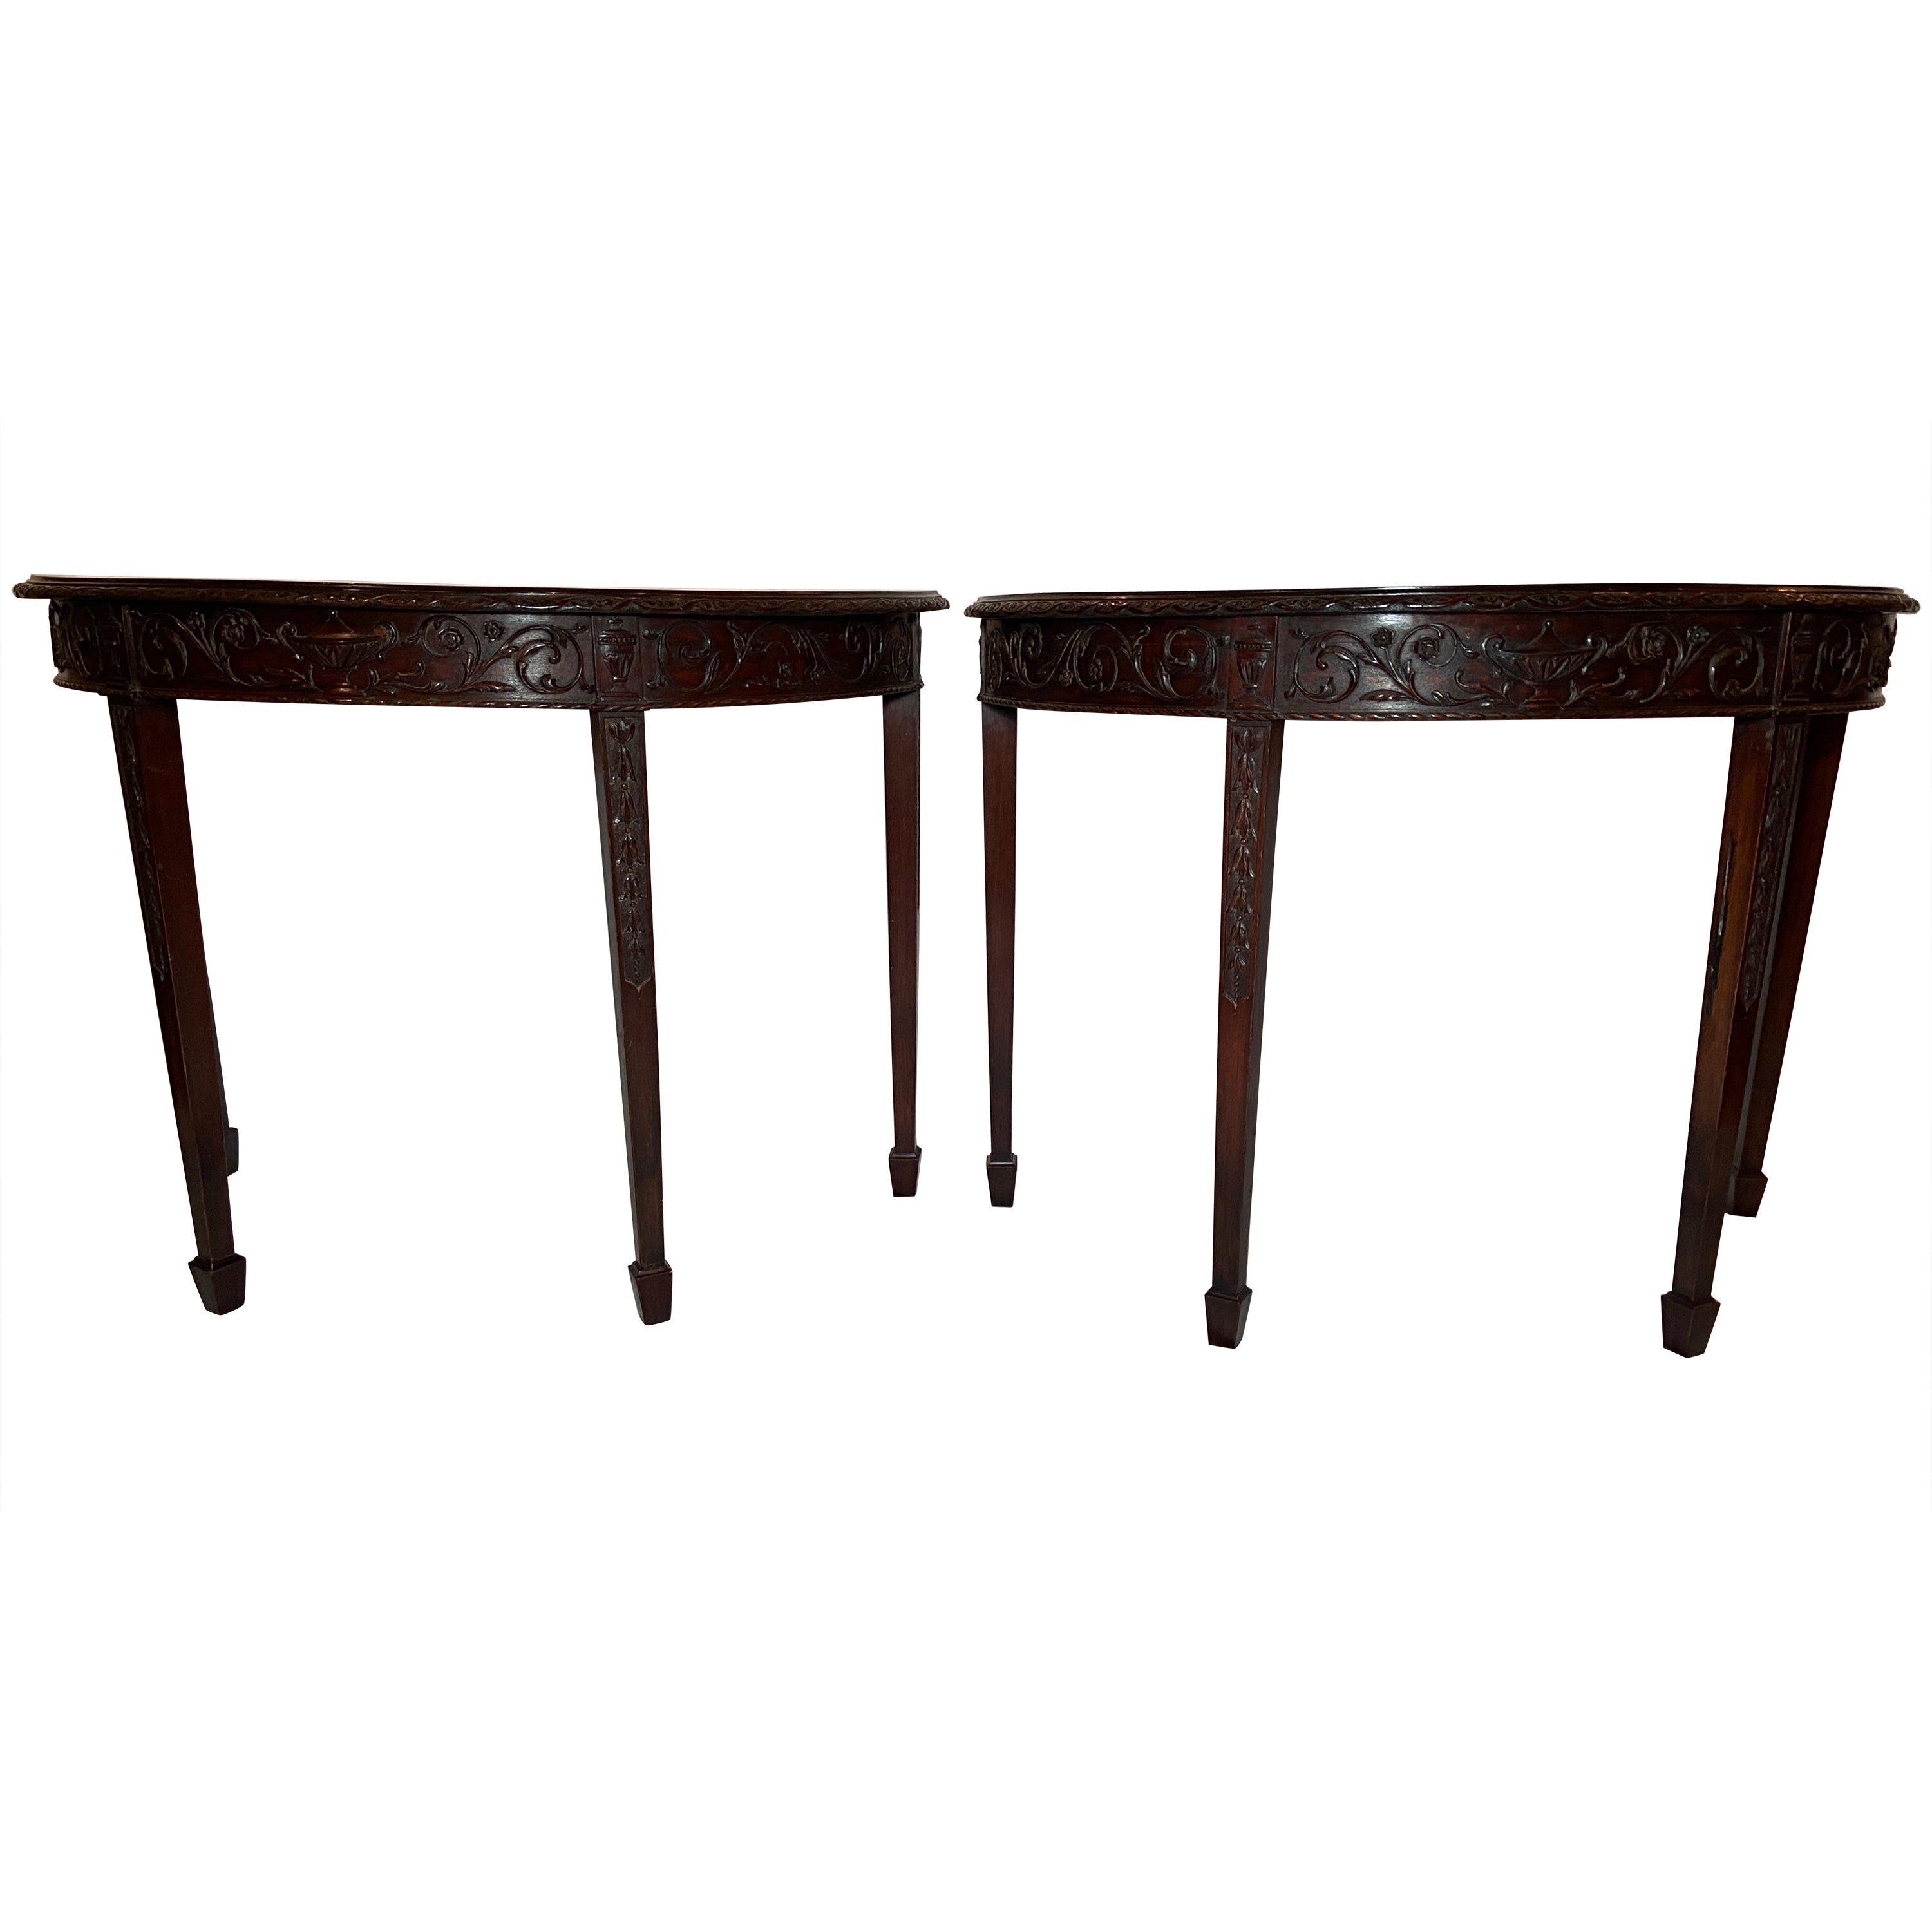 Pair Antique English Inlaid Mahogany Demi-Lune Console Tables, Circa 1880's. For Sale